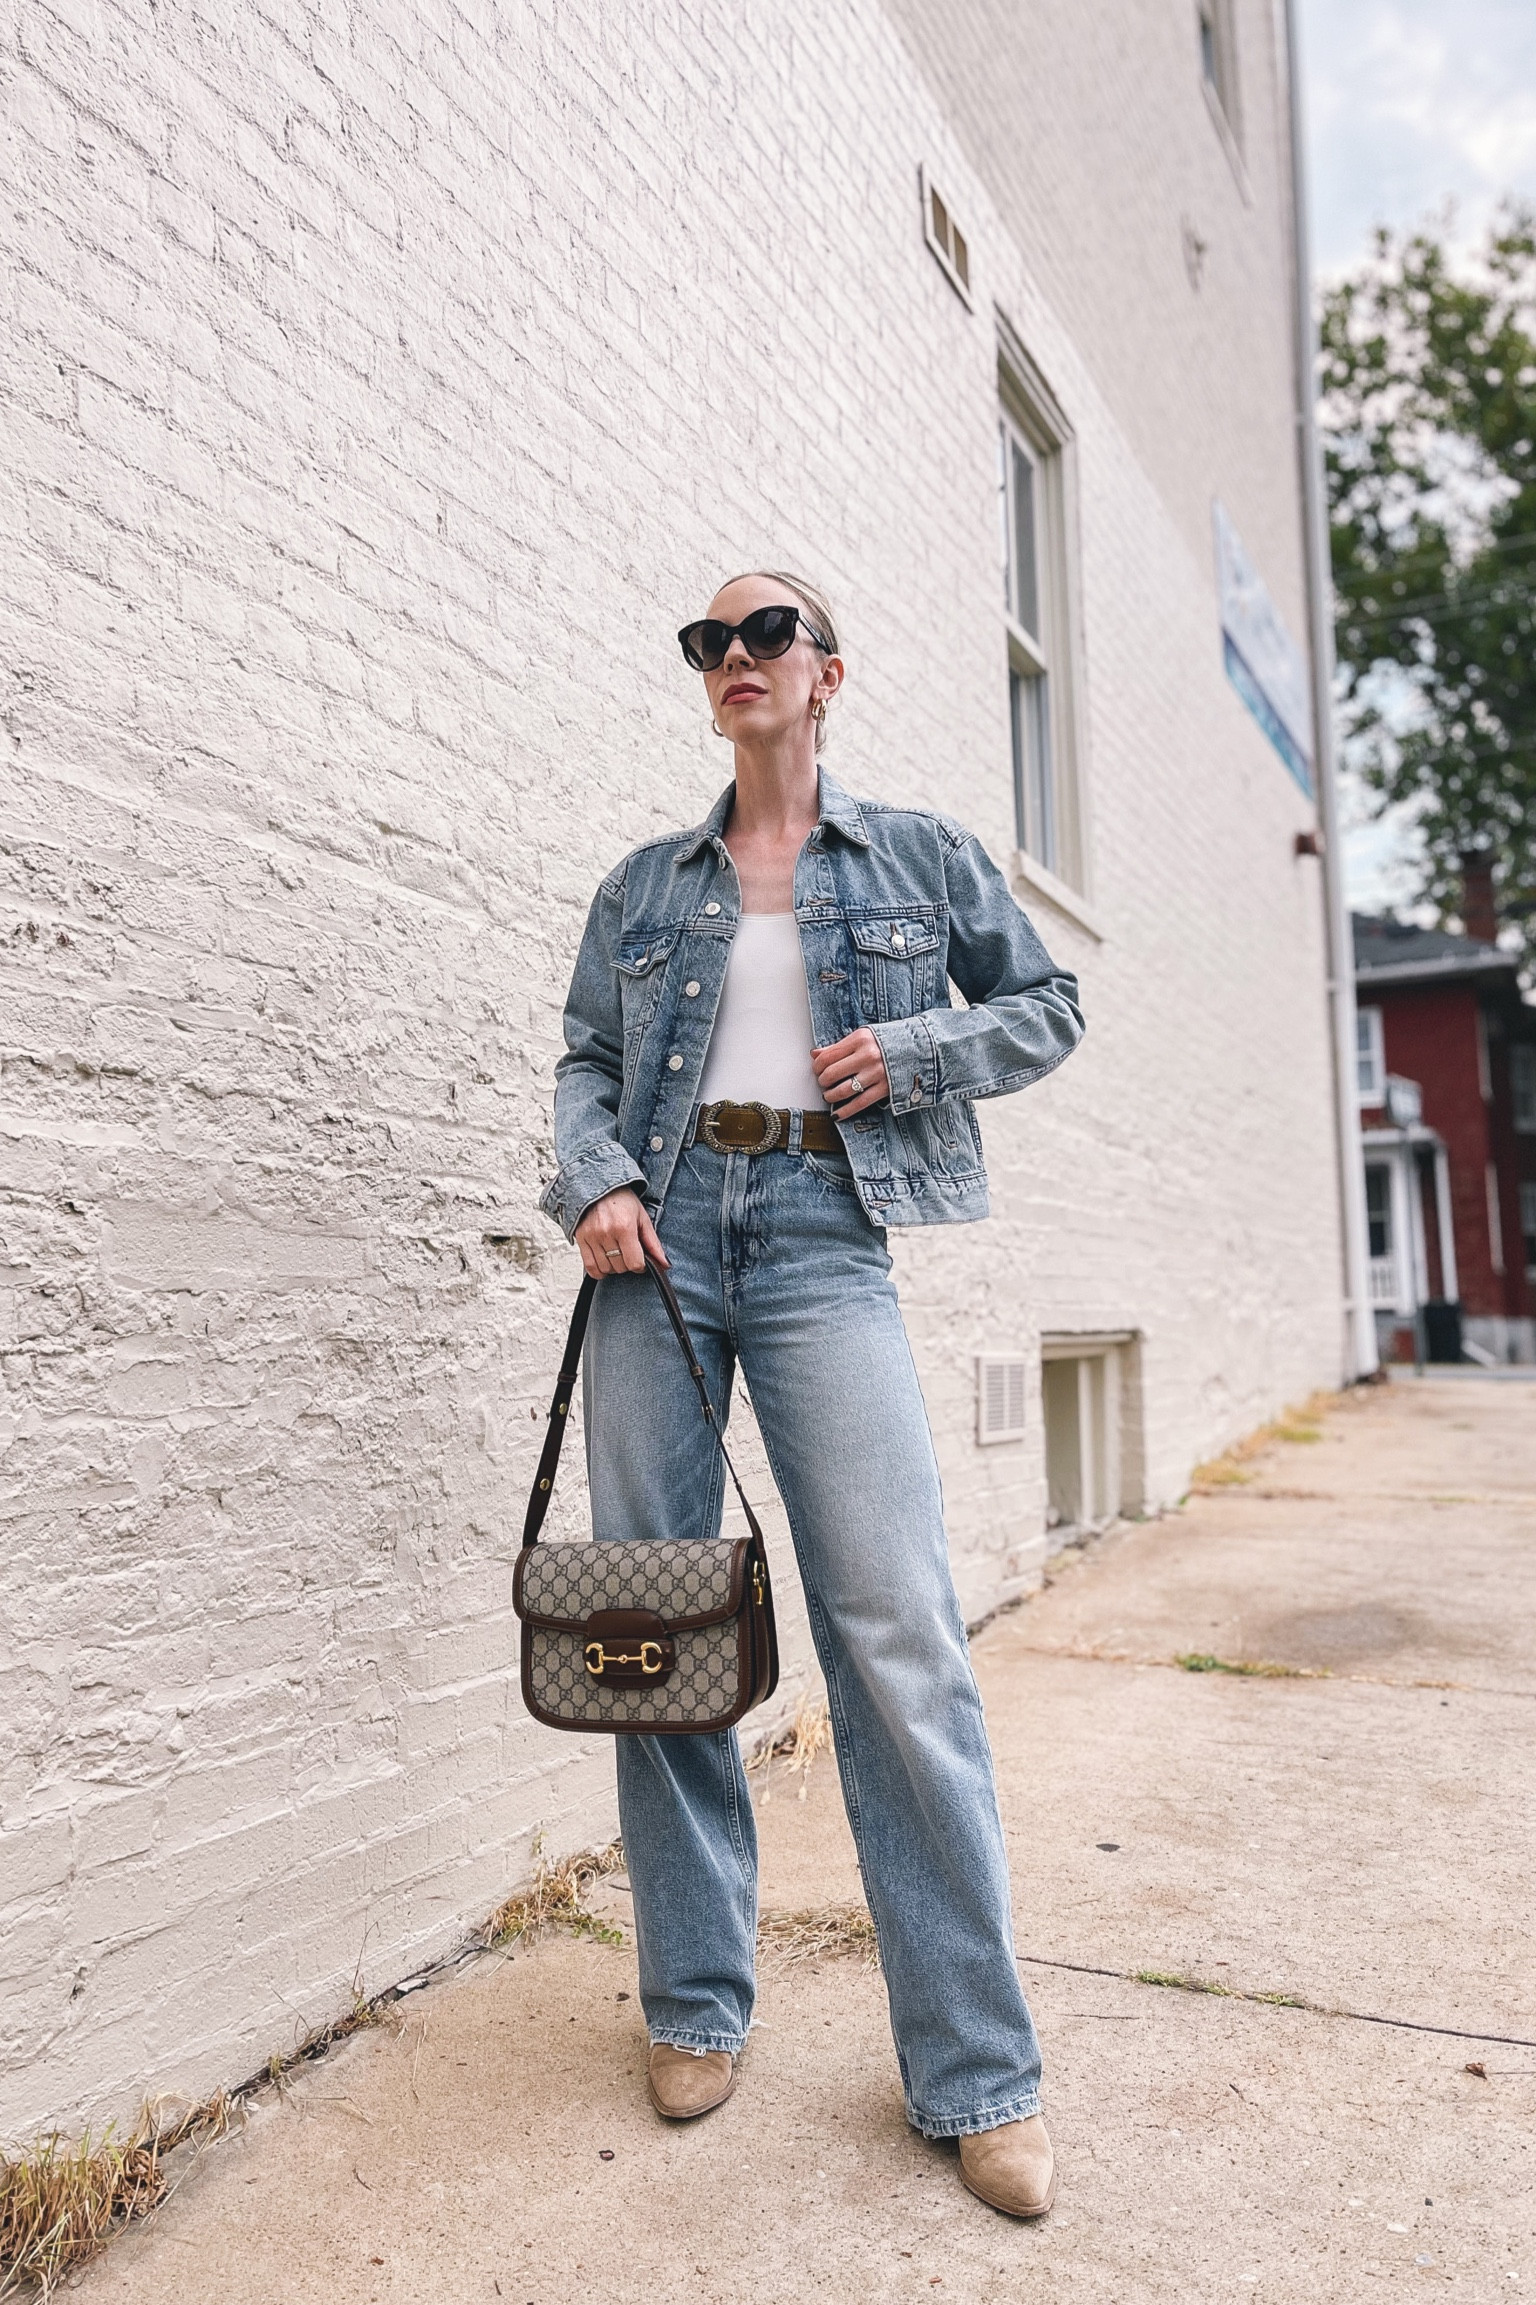 How I Styled My Gucci 1955 Horsebit Bag and Boyfriend Jeans